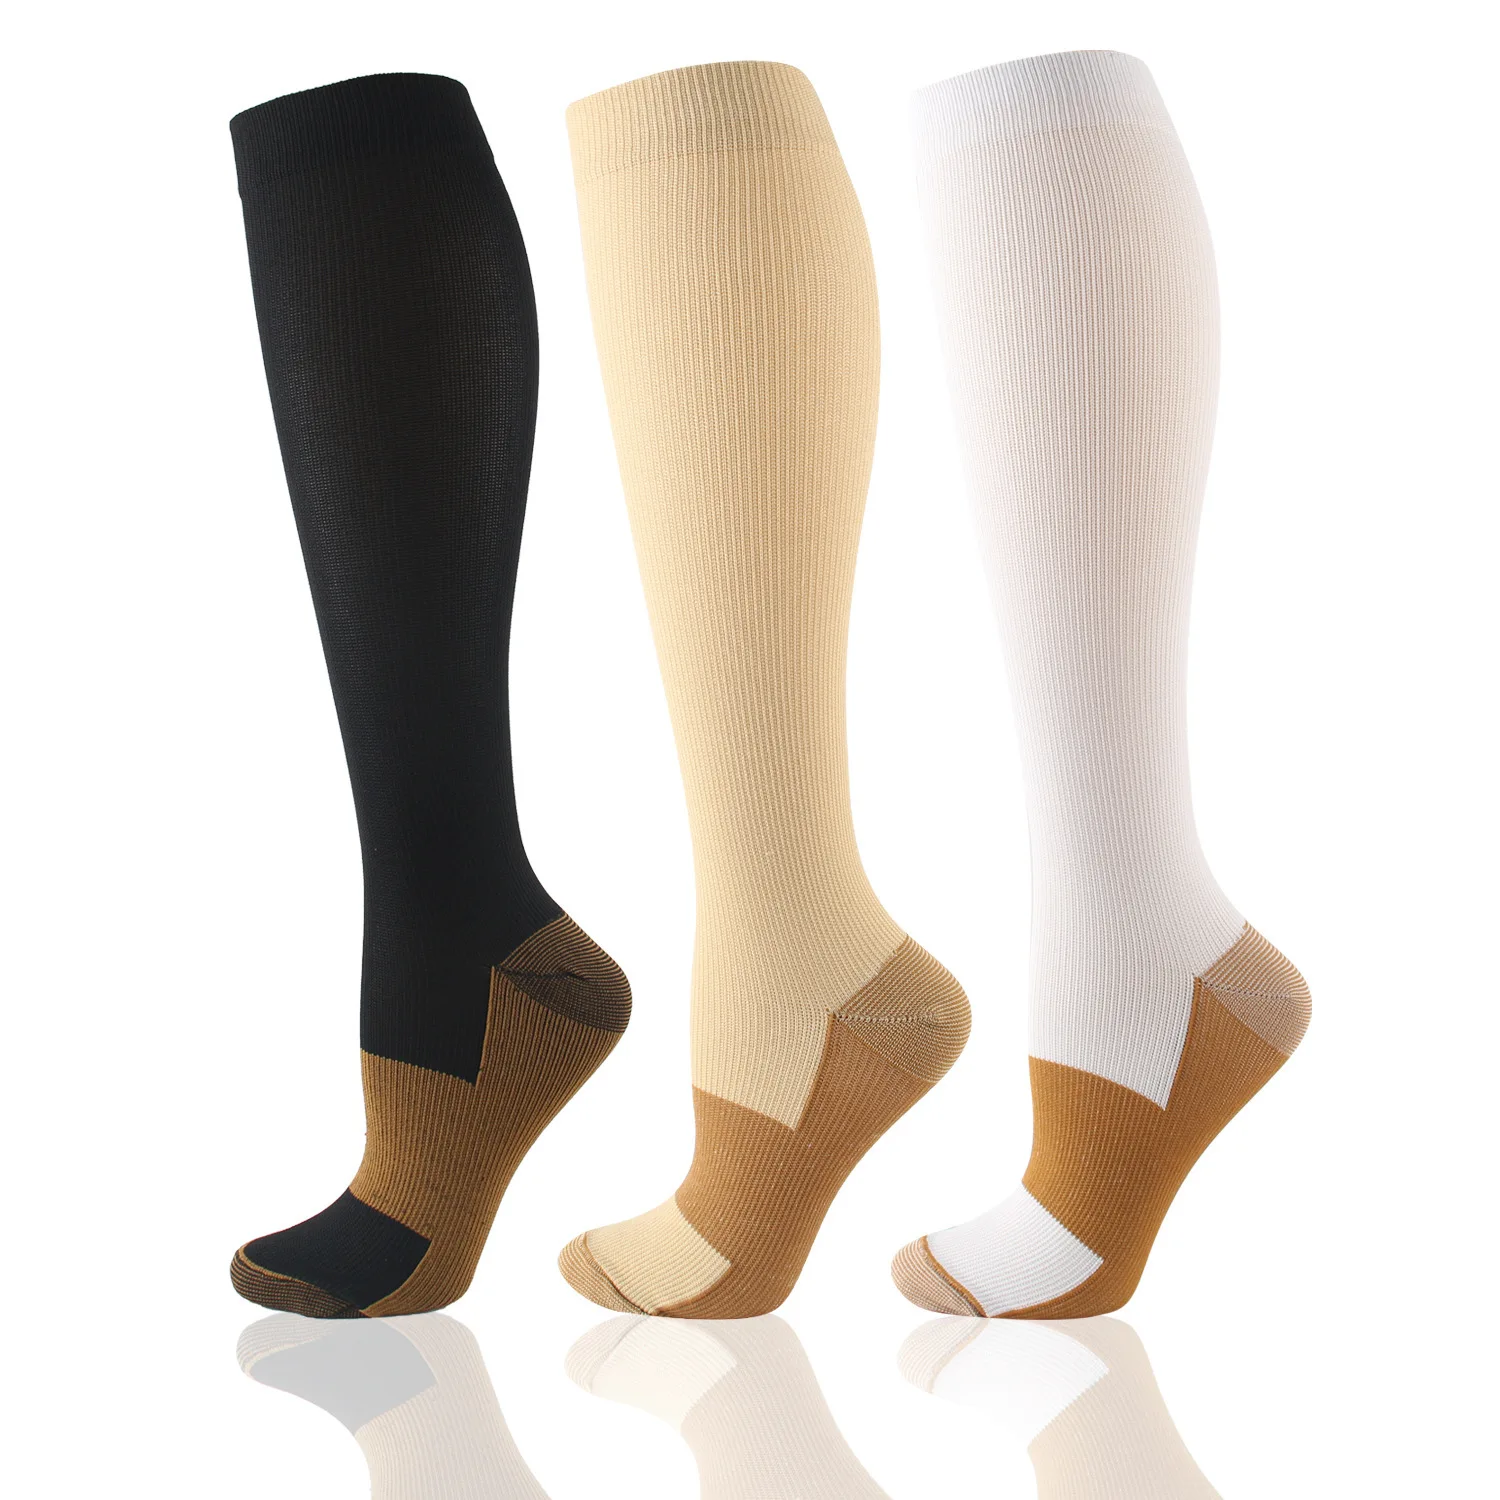 

Hh 3pair/lot Unisex Copper Compression Socks 15-20mmHg Anti Fatigue Pain Relief Graduated Pressure Stockings Knee High Sock